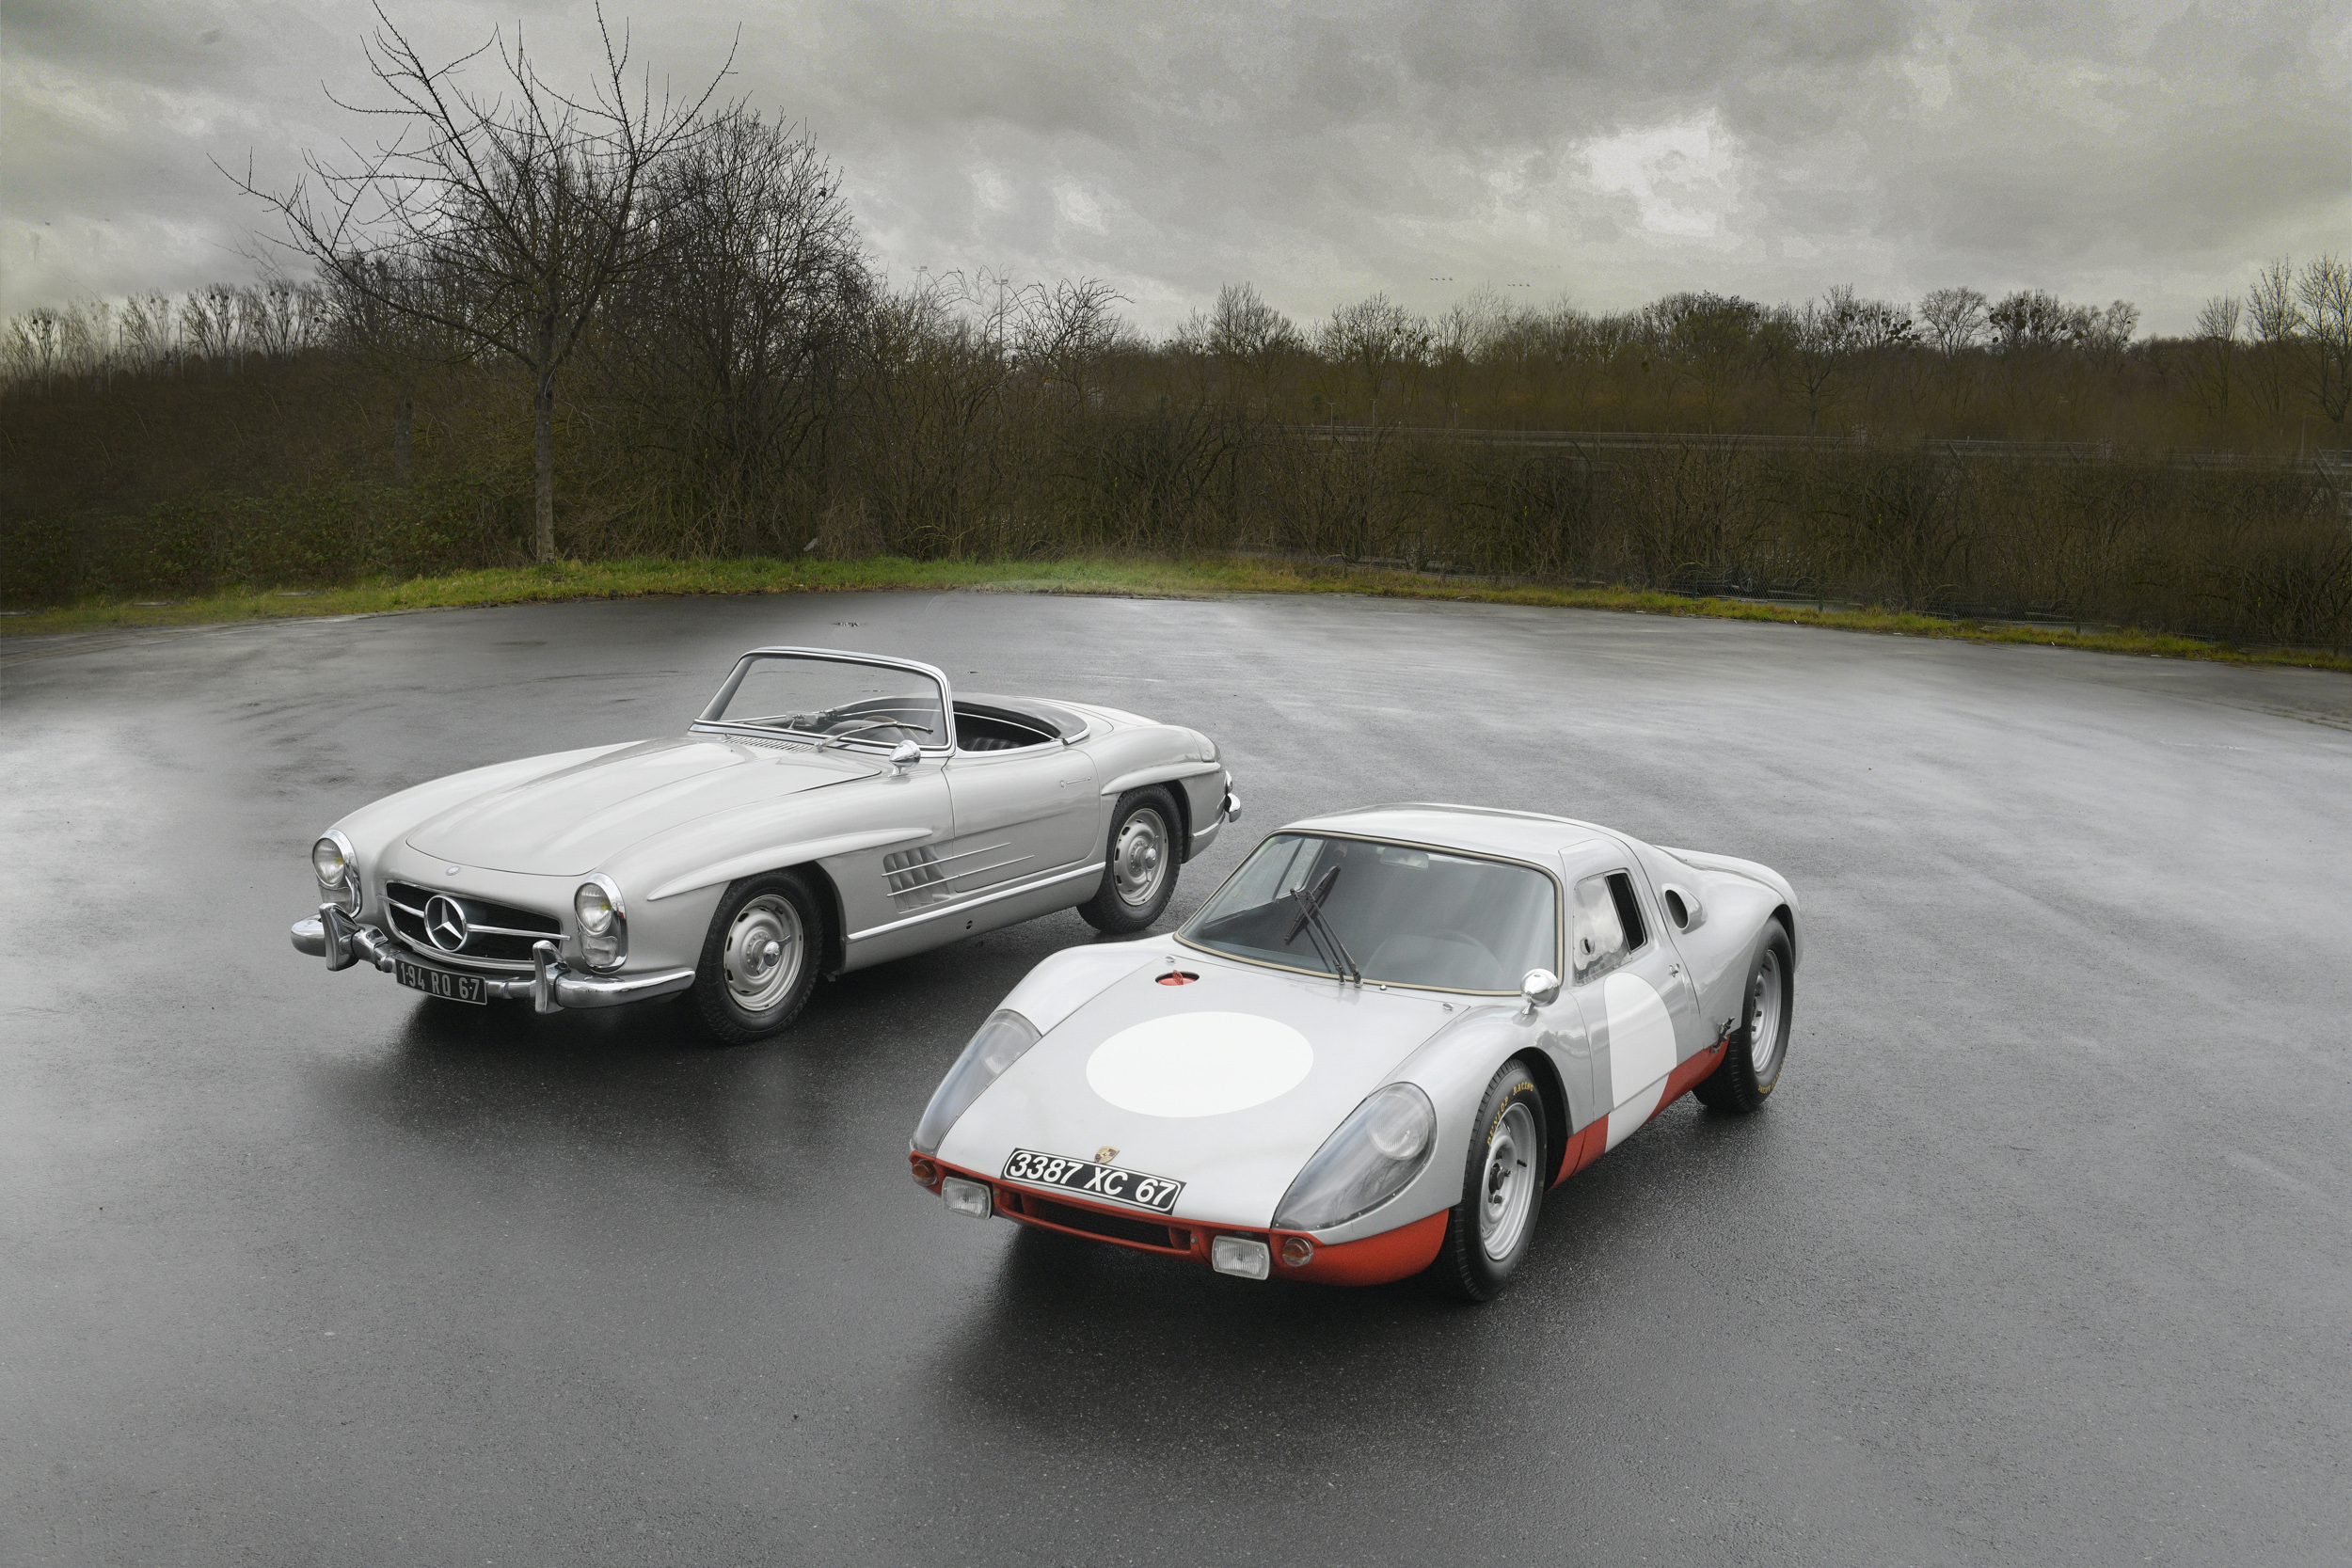 The 1958 Mercedes-Benz 300SL Roadster and 1964 Porsche 904 GTS presented from the Petitjean Collection (Credit – Tom Wood © 2020 Courtesy of RM Sotheby’s) [4]